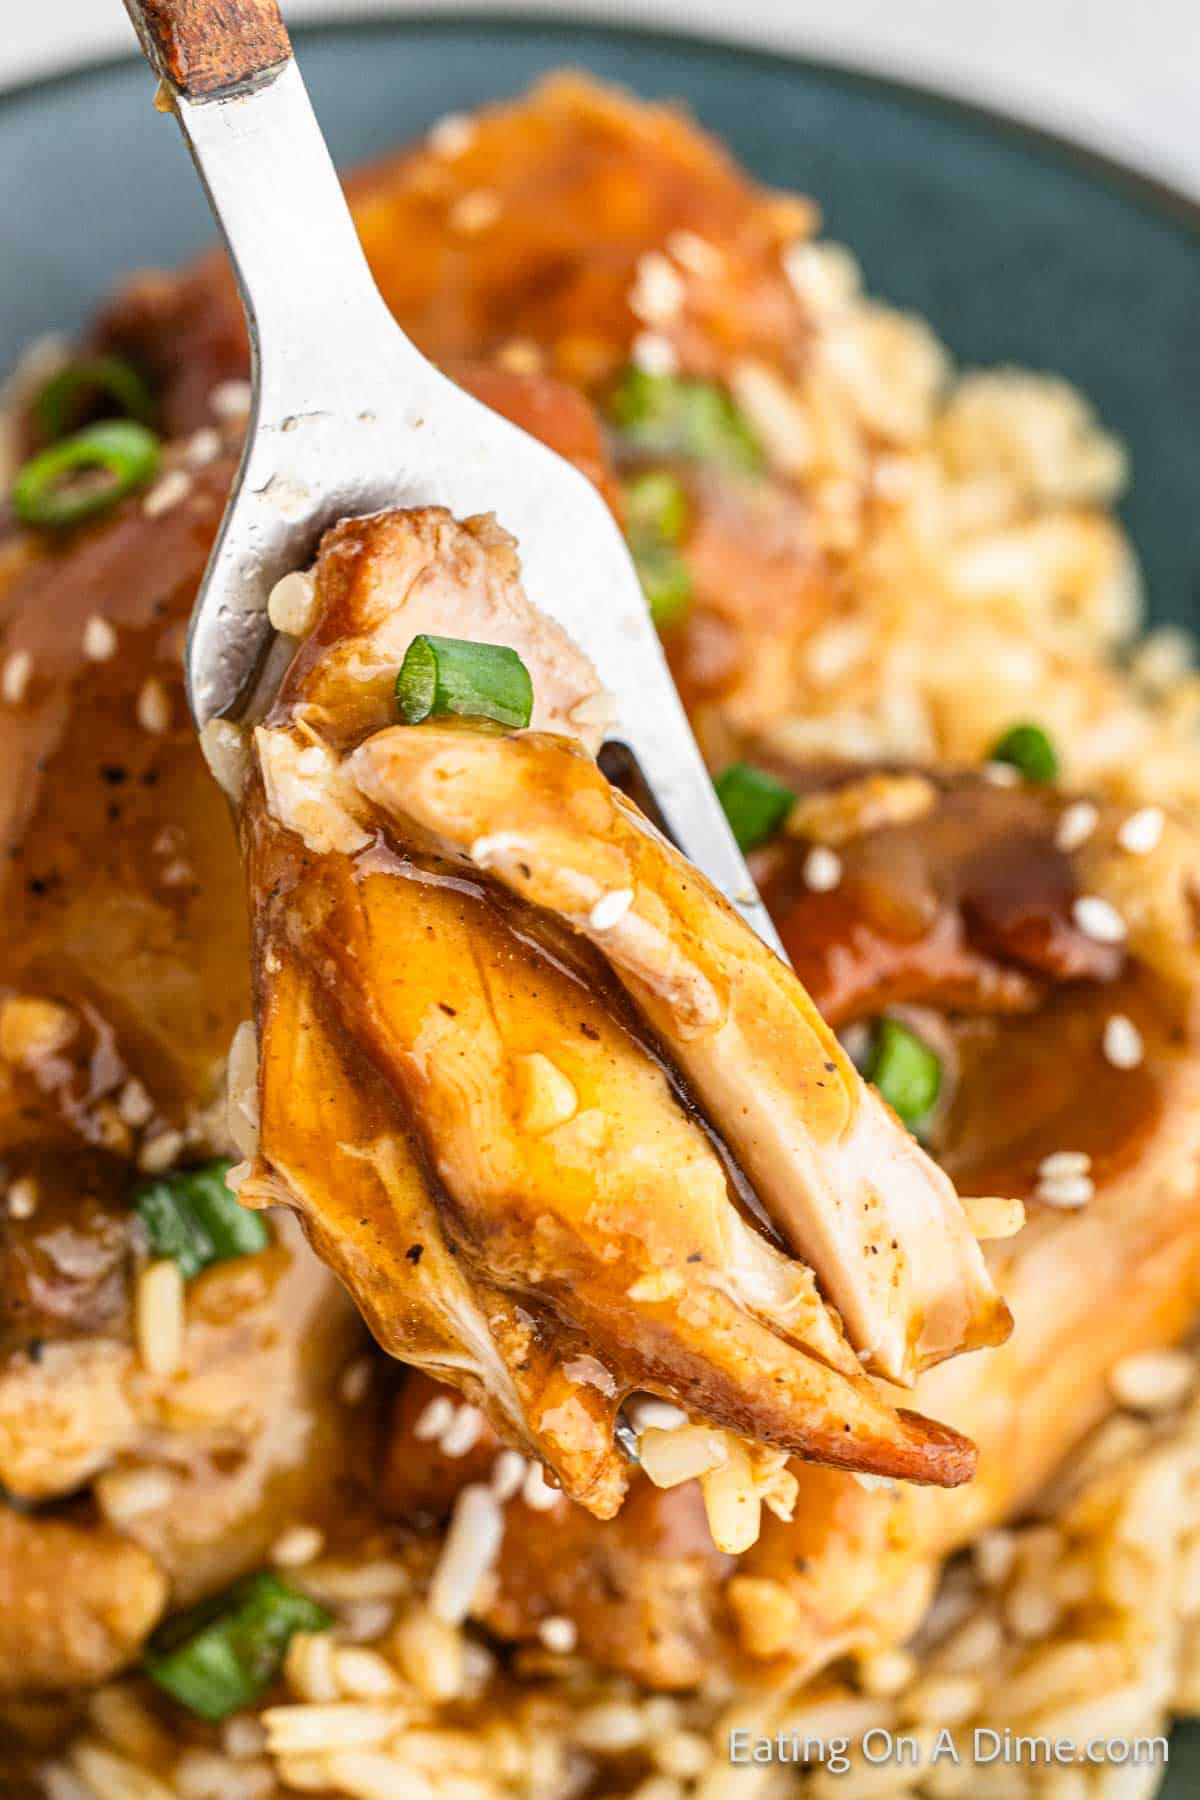 Sticky chicken in the back ground with a bite of chicken covered in sauce on a fork